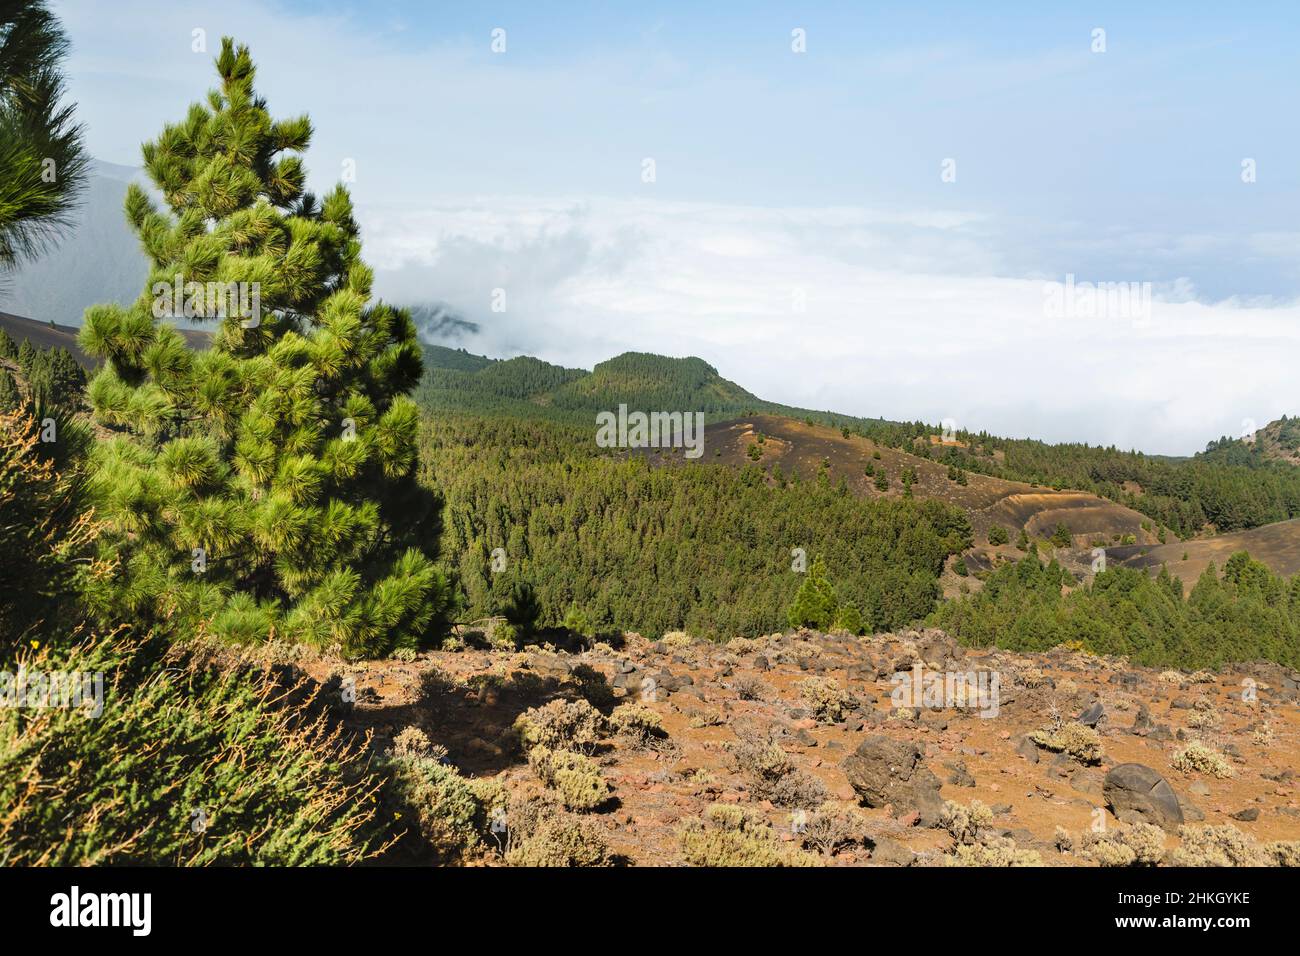 Colorful trees and red lava landscape above the clouds along the Ruta de los Volcanes in La Palma, Spain. Stock Photo